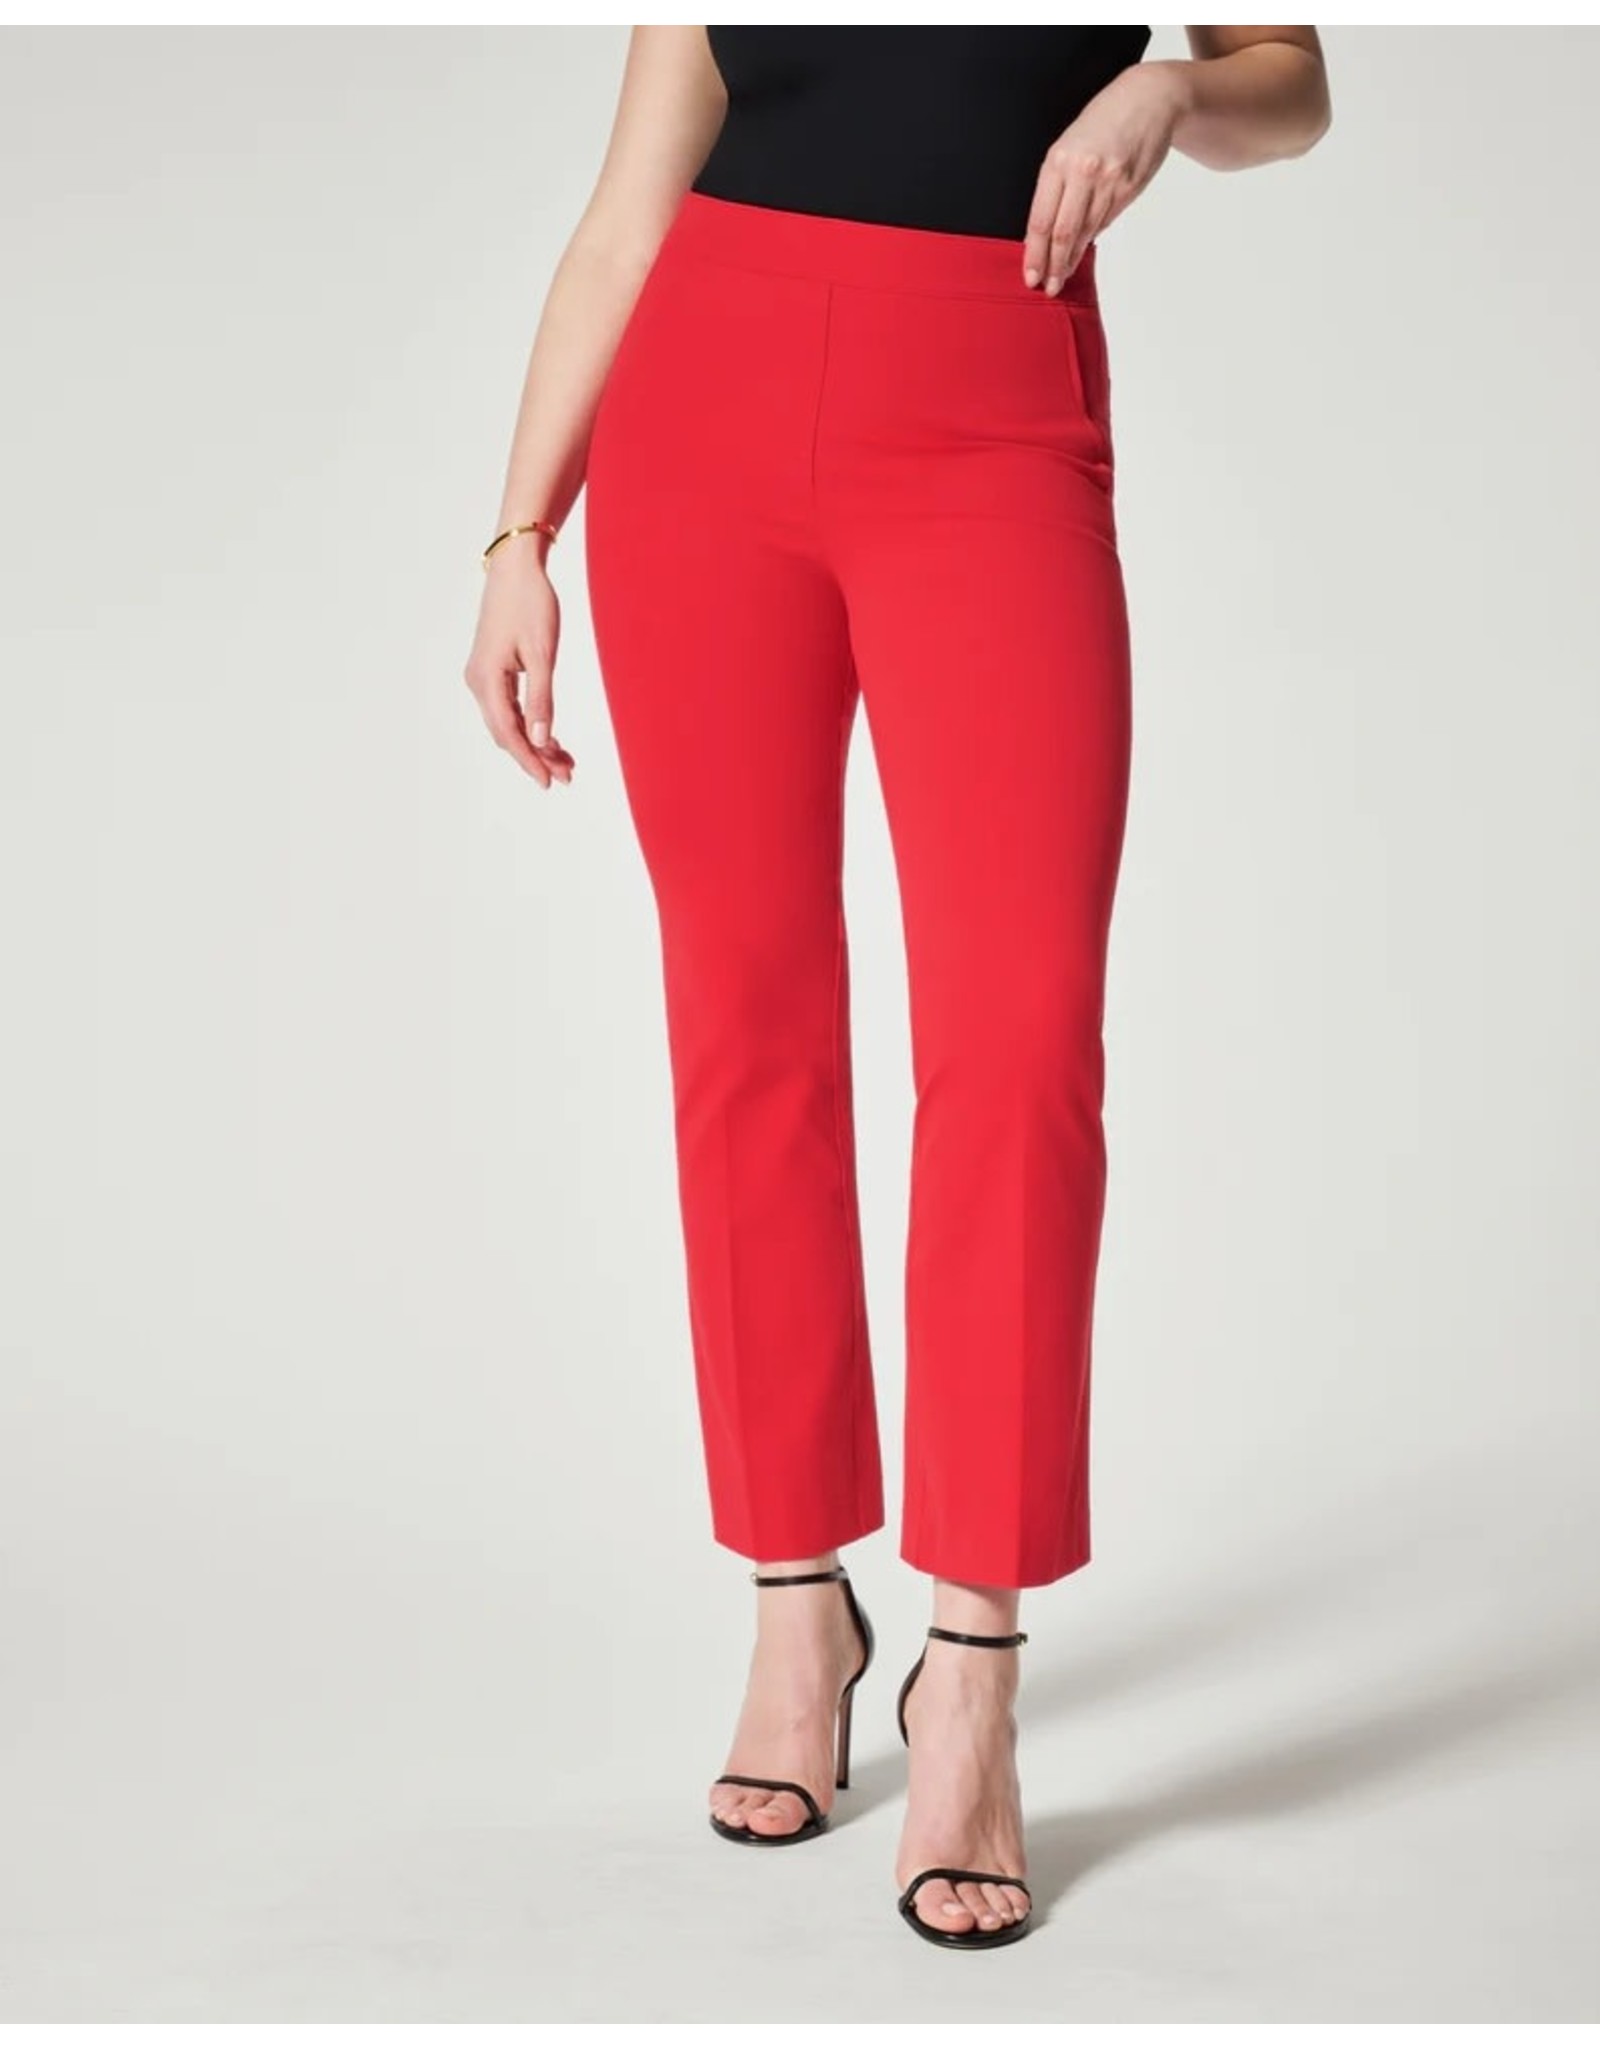 Spanx On-the-Go Kick Flare Pant in Red